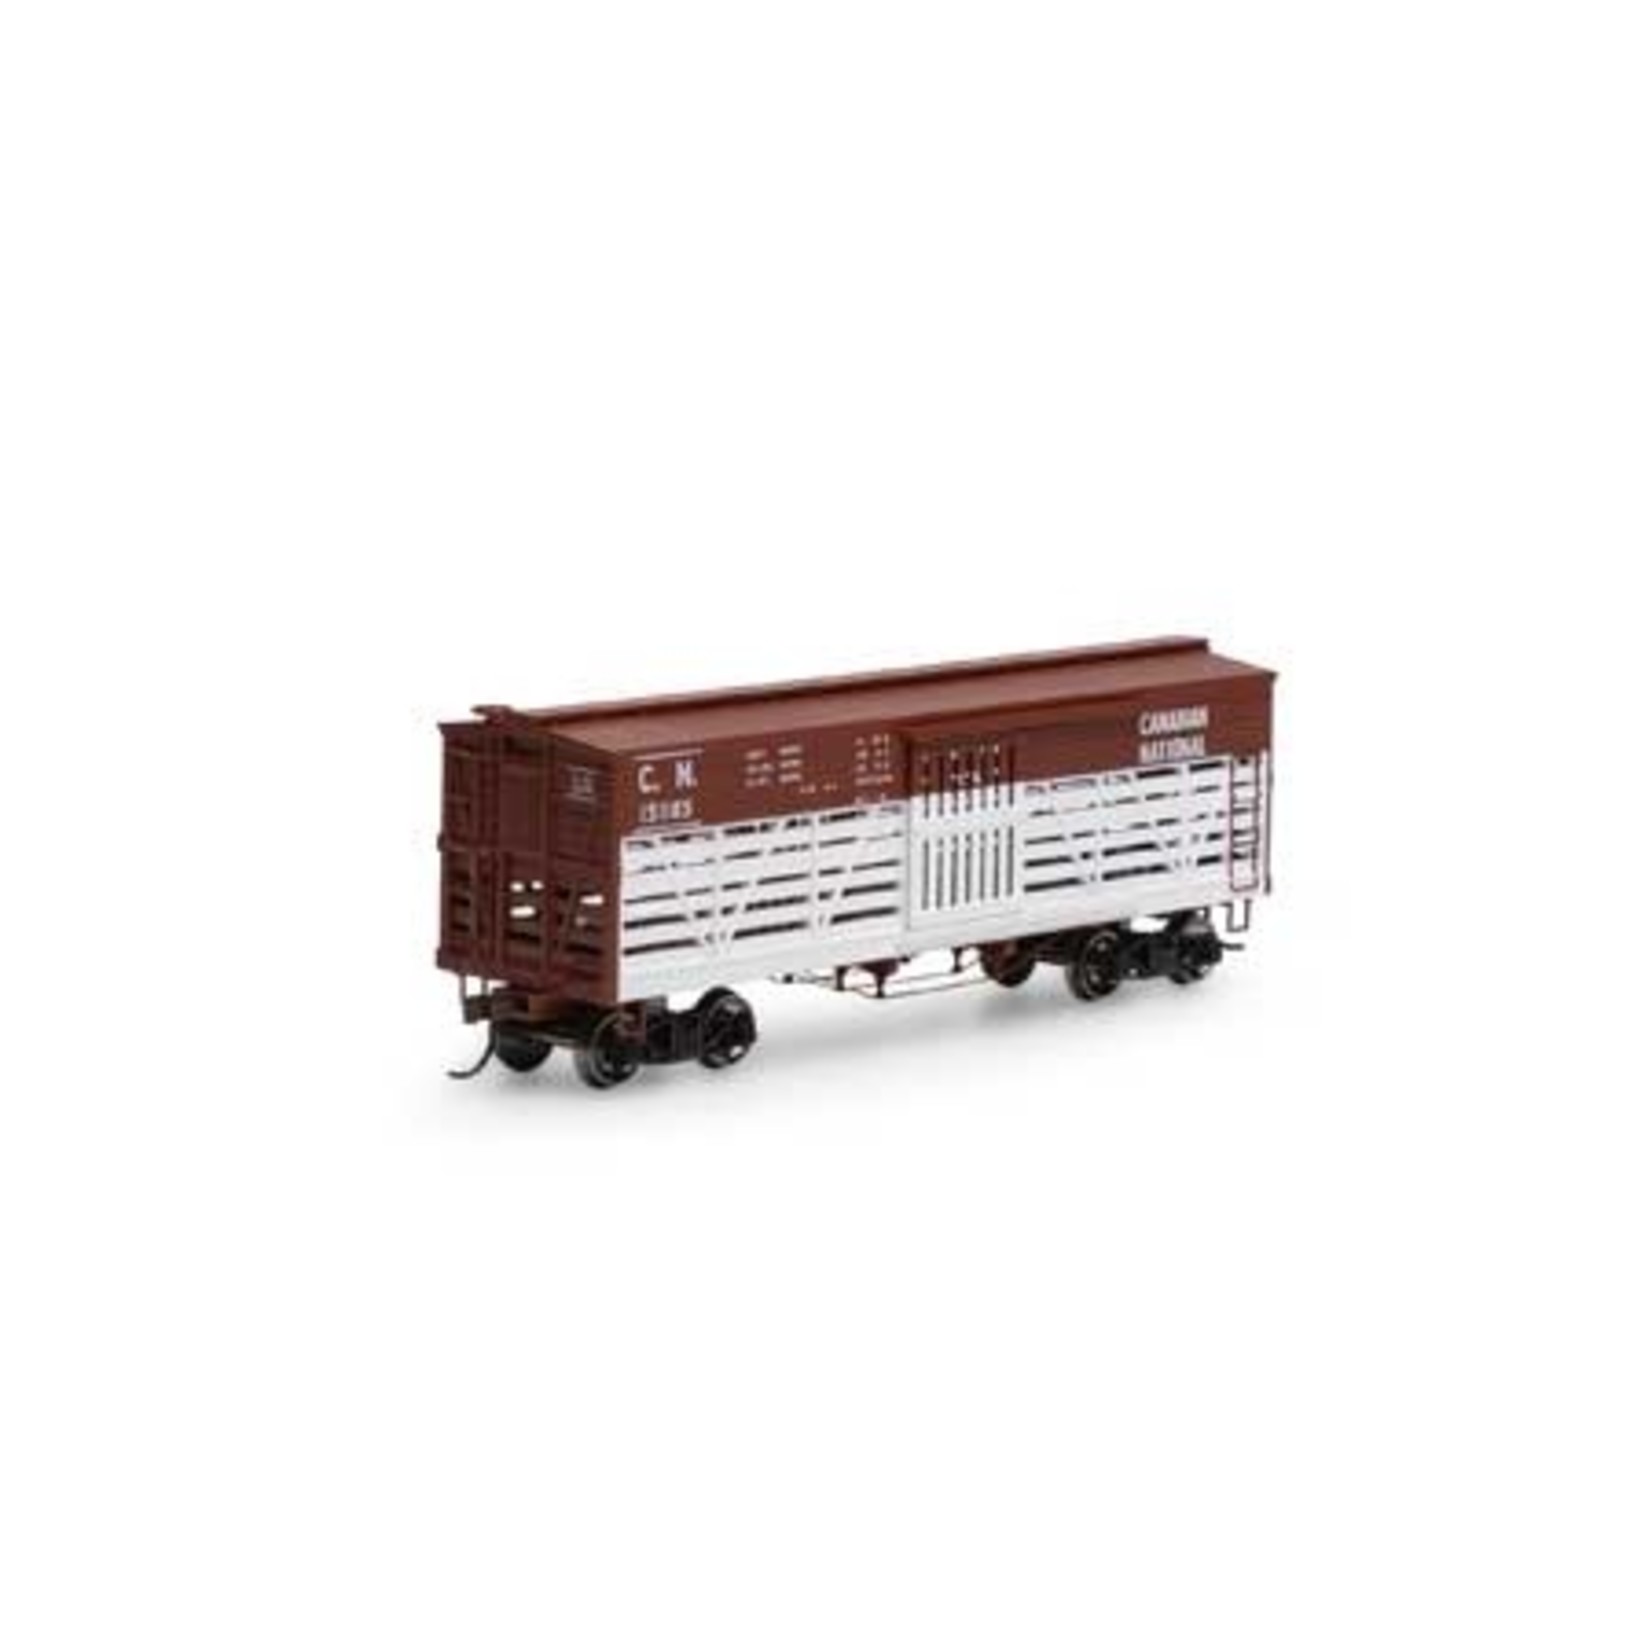 Roundhouse HO 36' Old Time Stock Car, CN #151185